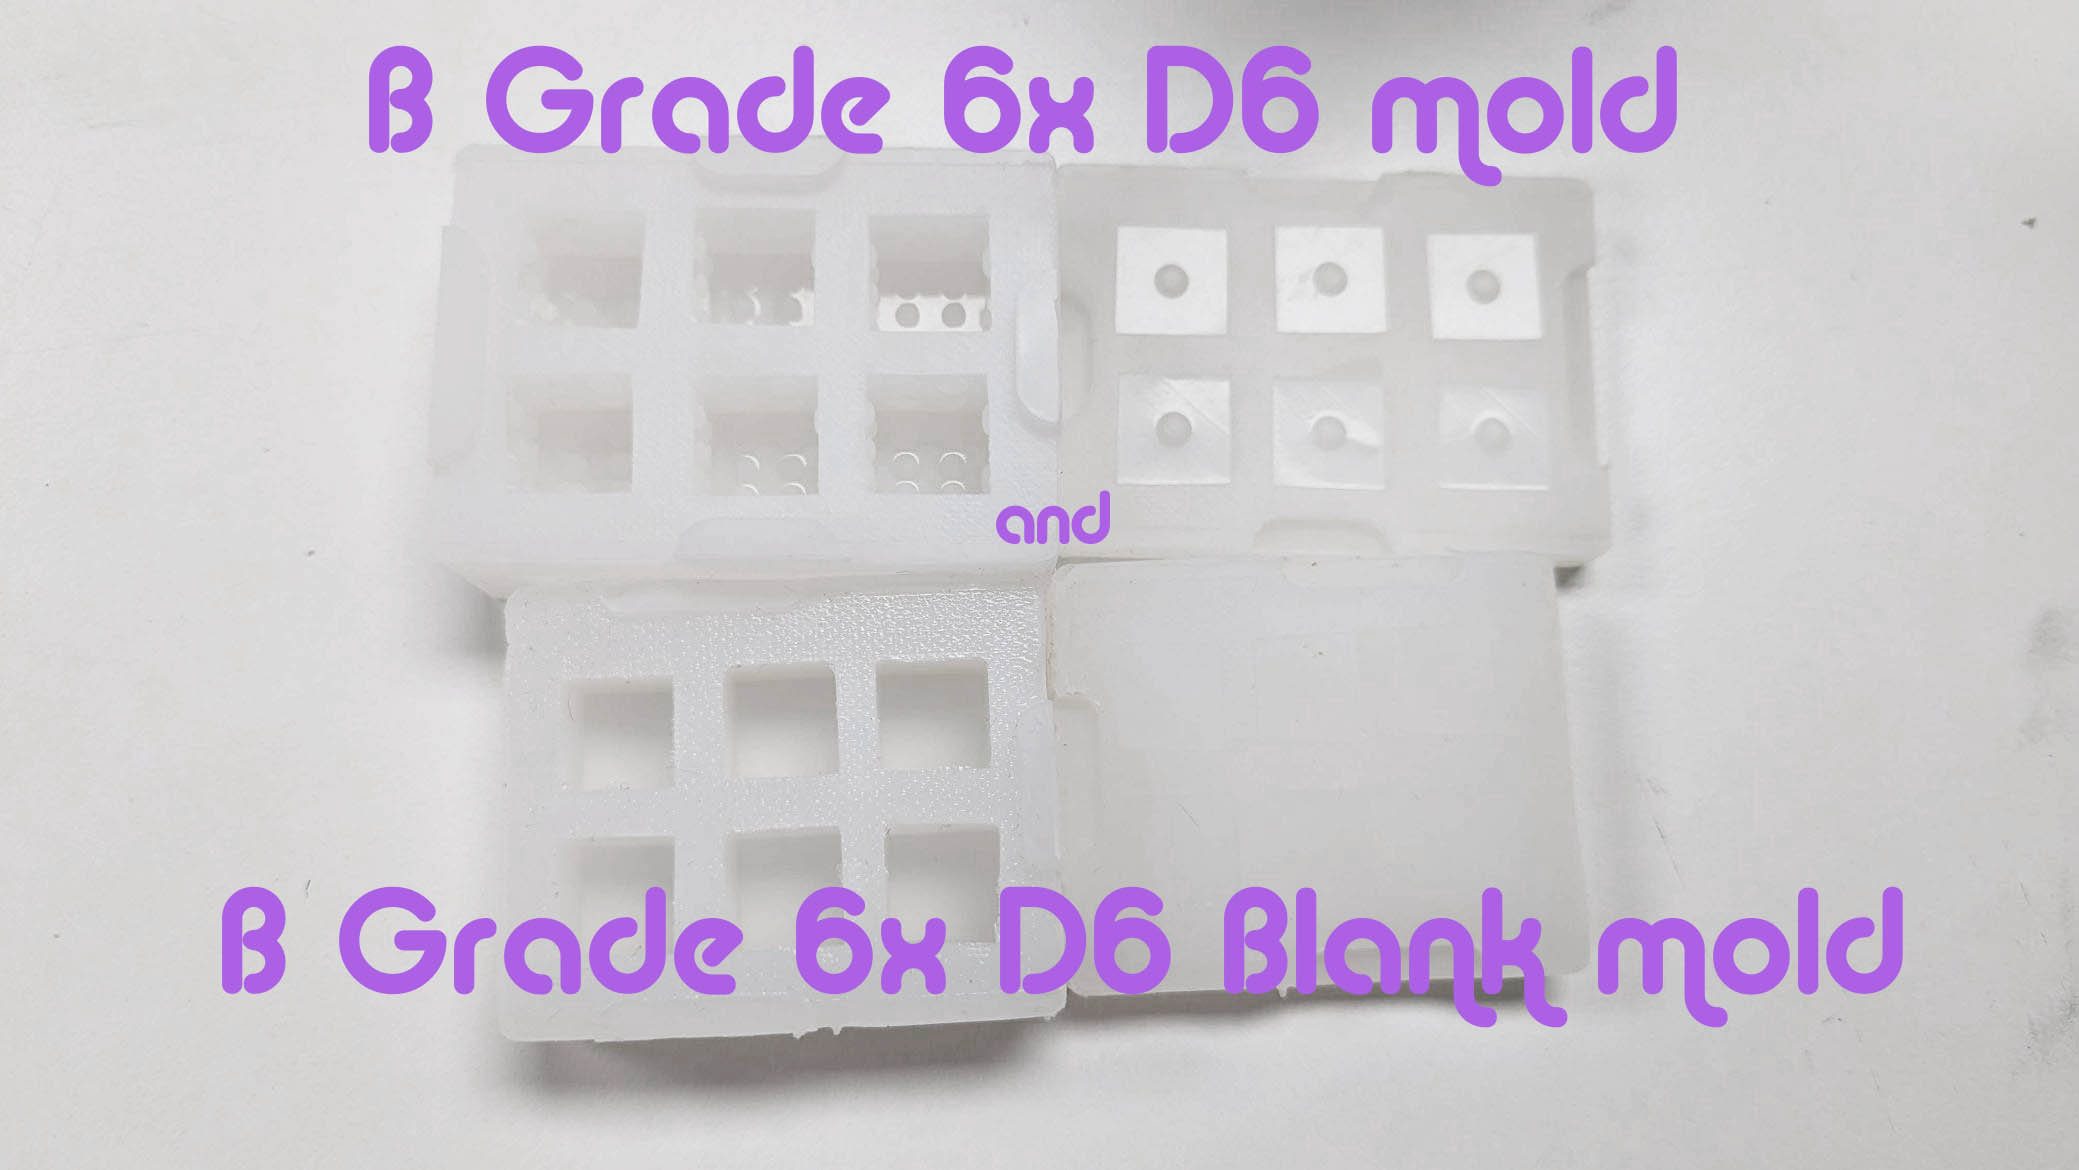 B-grade Dice Molds Flawed: ALL STYLES Druid Dice 